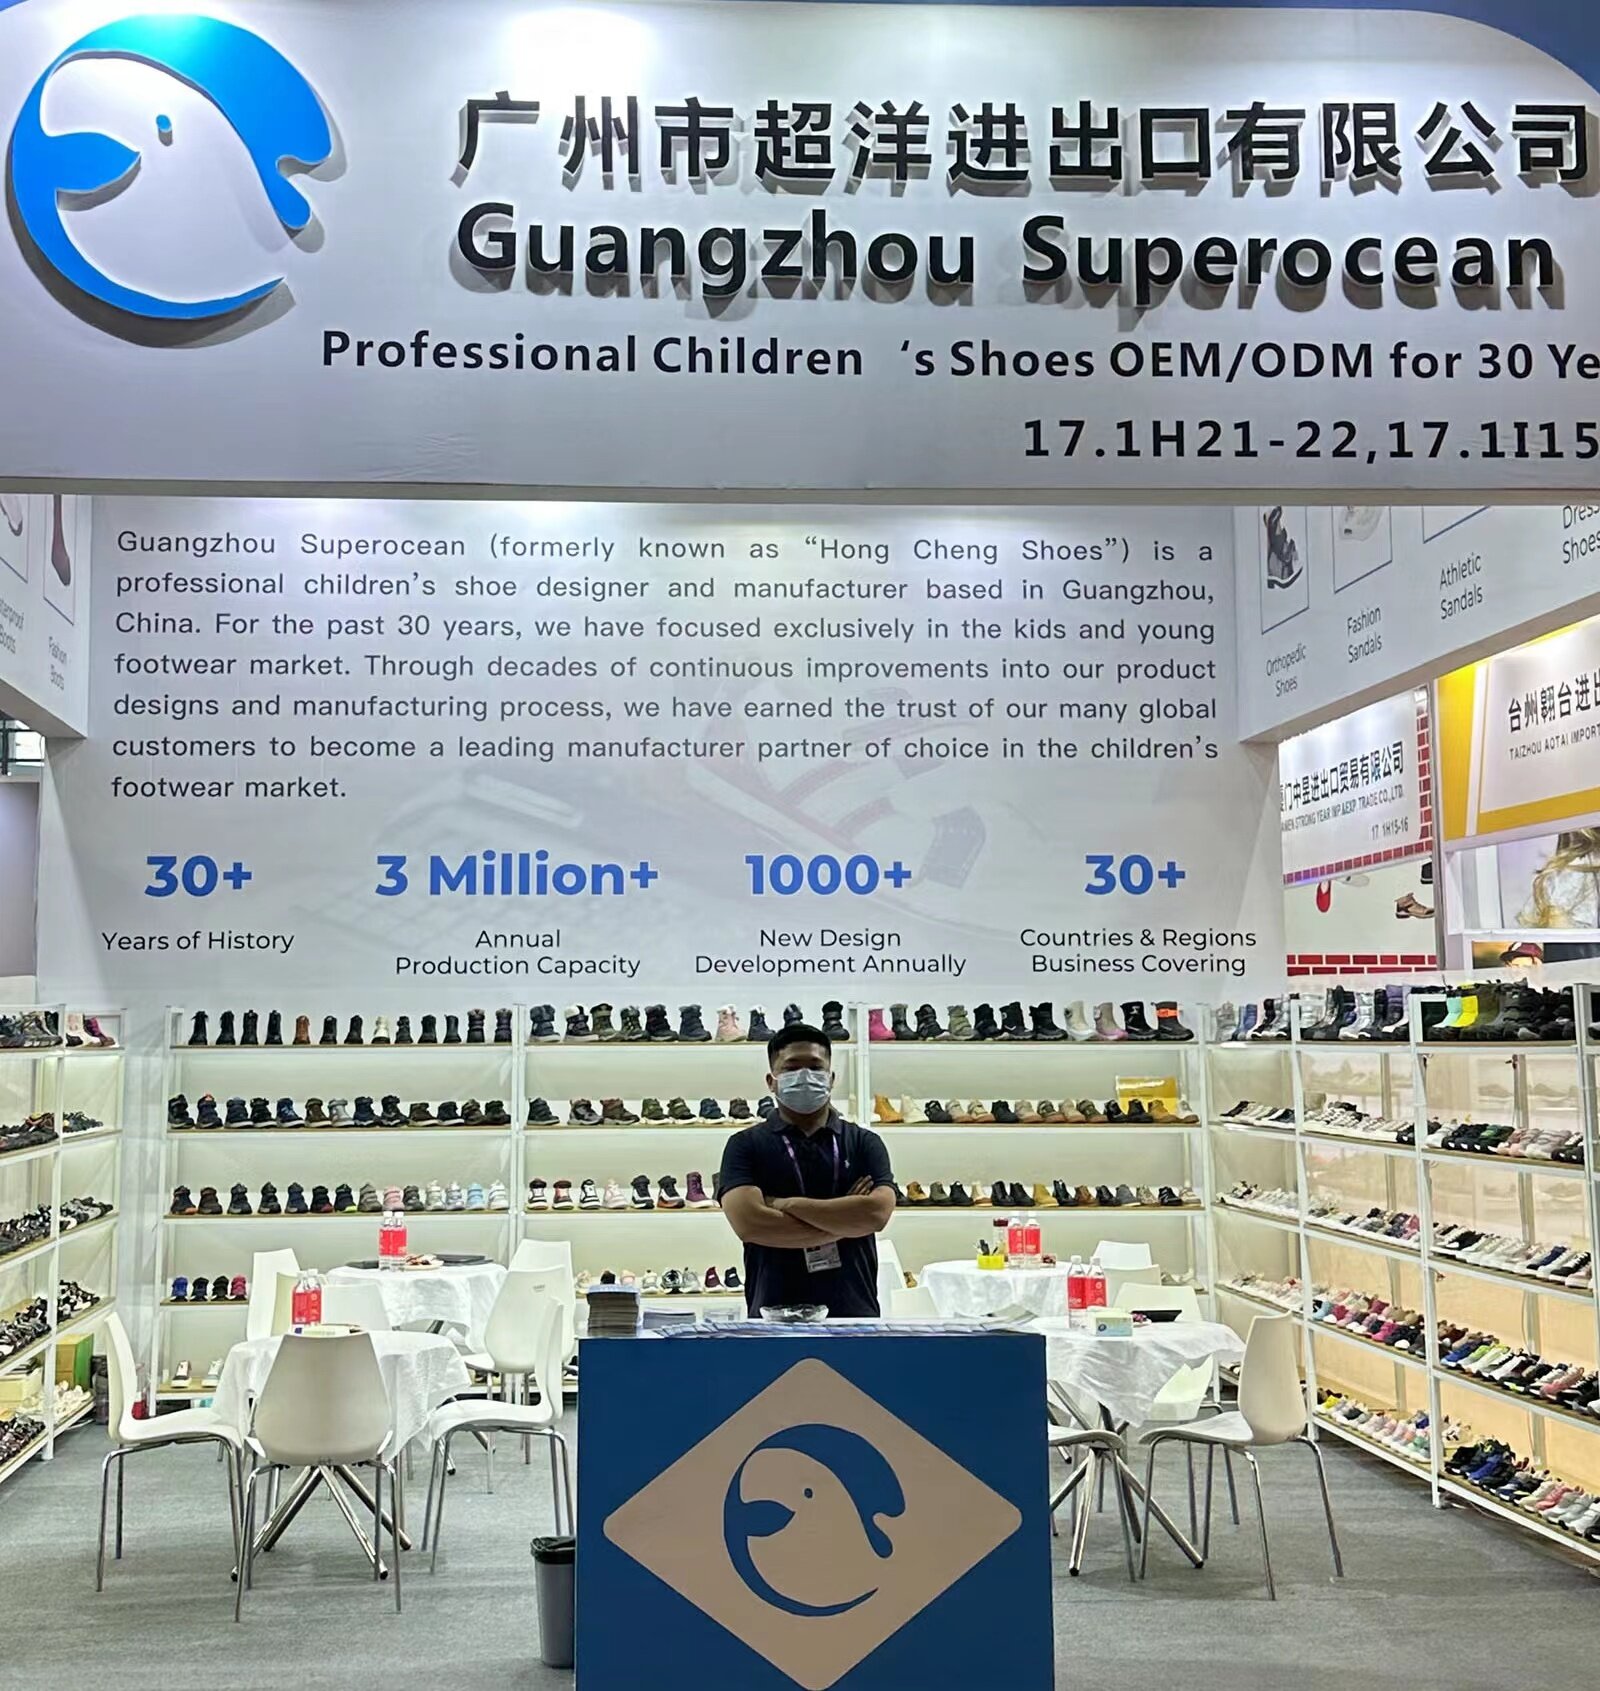 SuperOcean successfully completed the 133rd Canton Fair